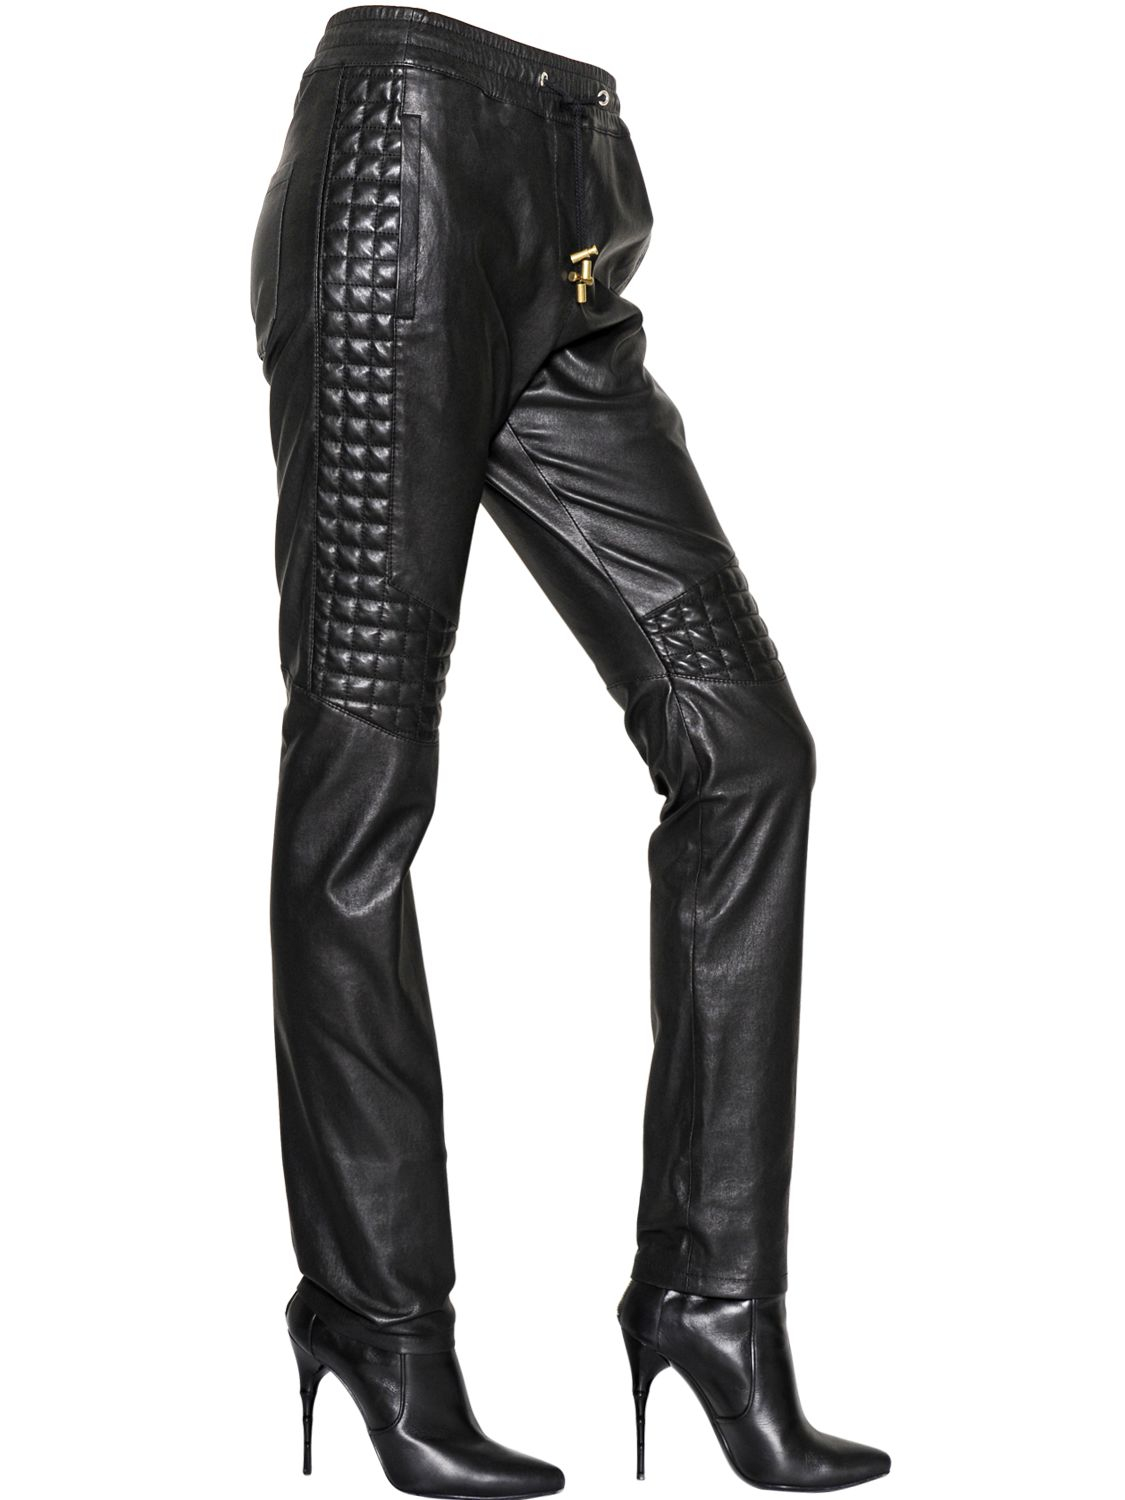 Balmain Quilted Nappa Leather Trousers in Black for Men - Lyst